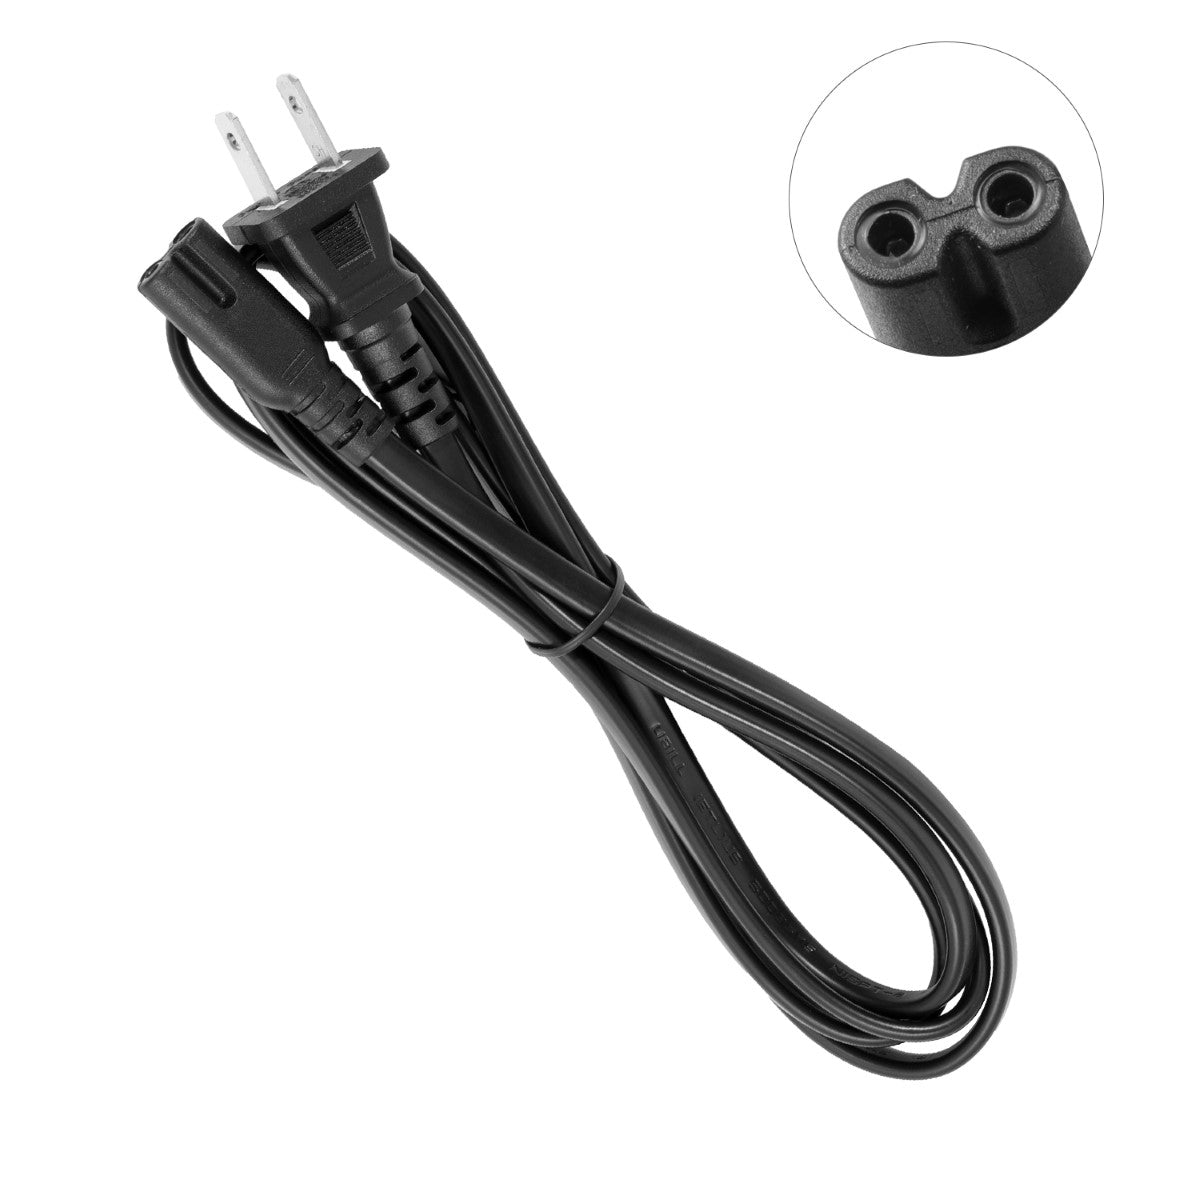 Power Cord for Epson Expression XP-200 Printer.